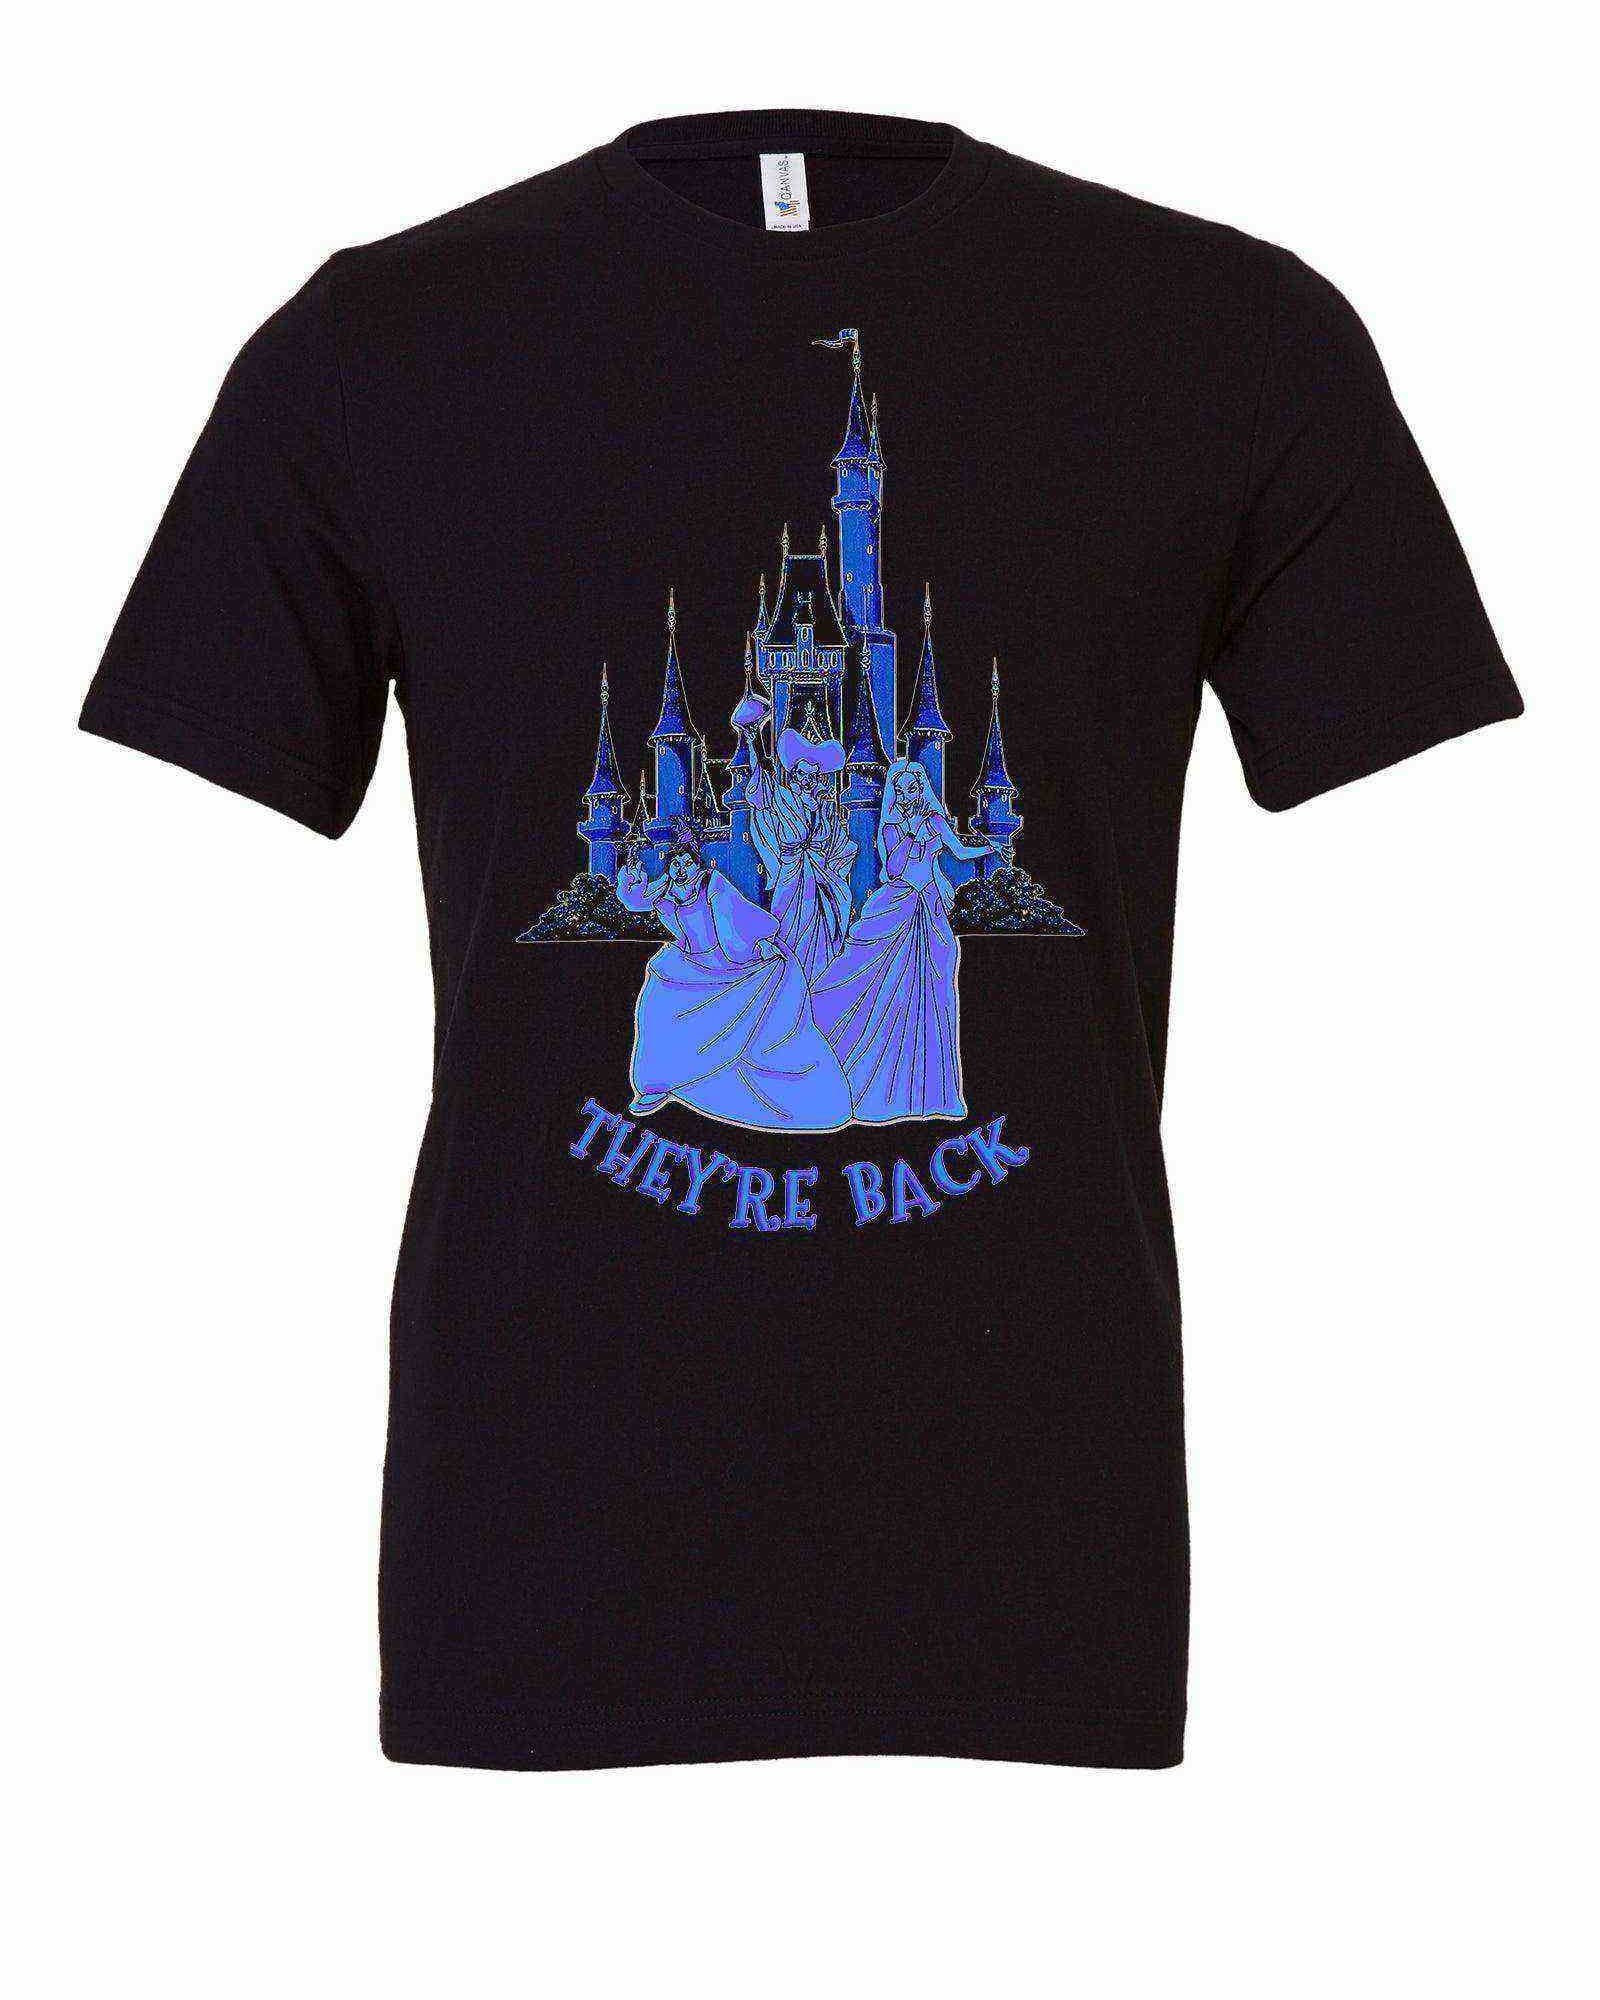 Sanderson Sisters Shirt | Witches Are Back | Magic Kingdom Hocus Pocus - Dylan's Tees